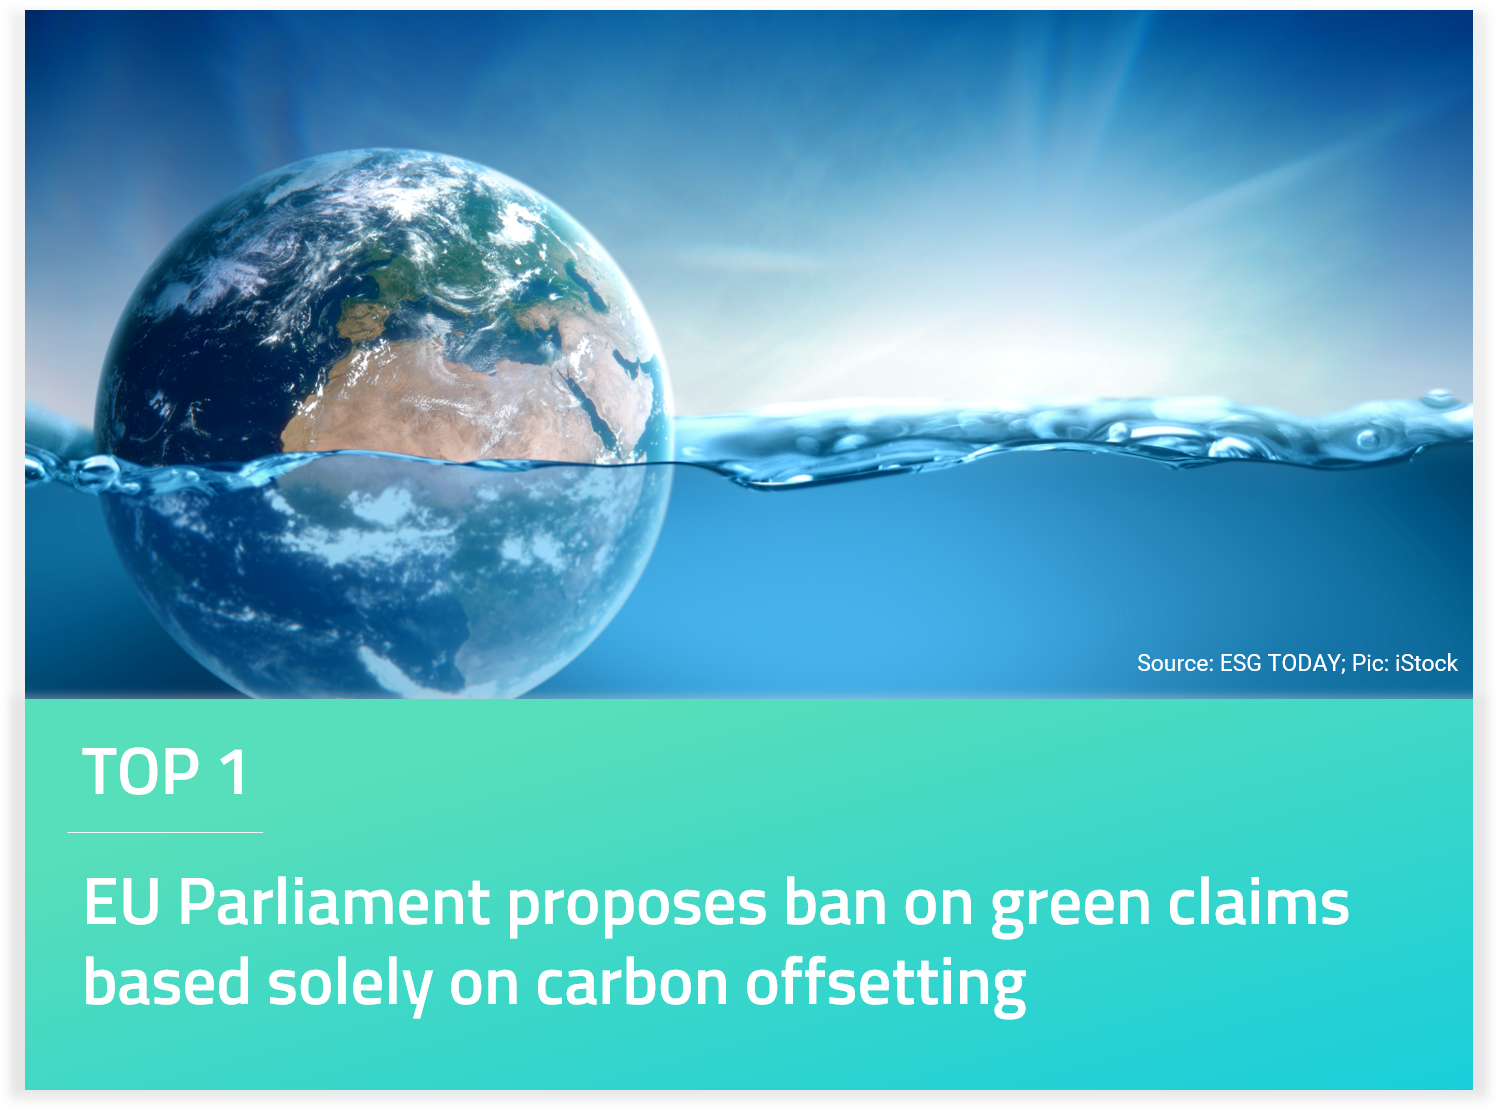 EU Parliament proposes ban on green claims based solely on carbon offsetting